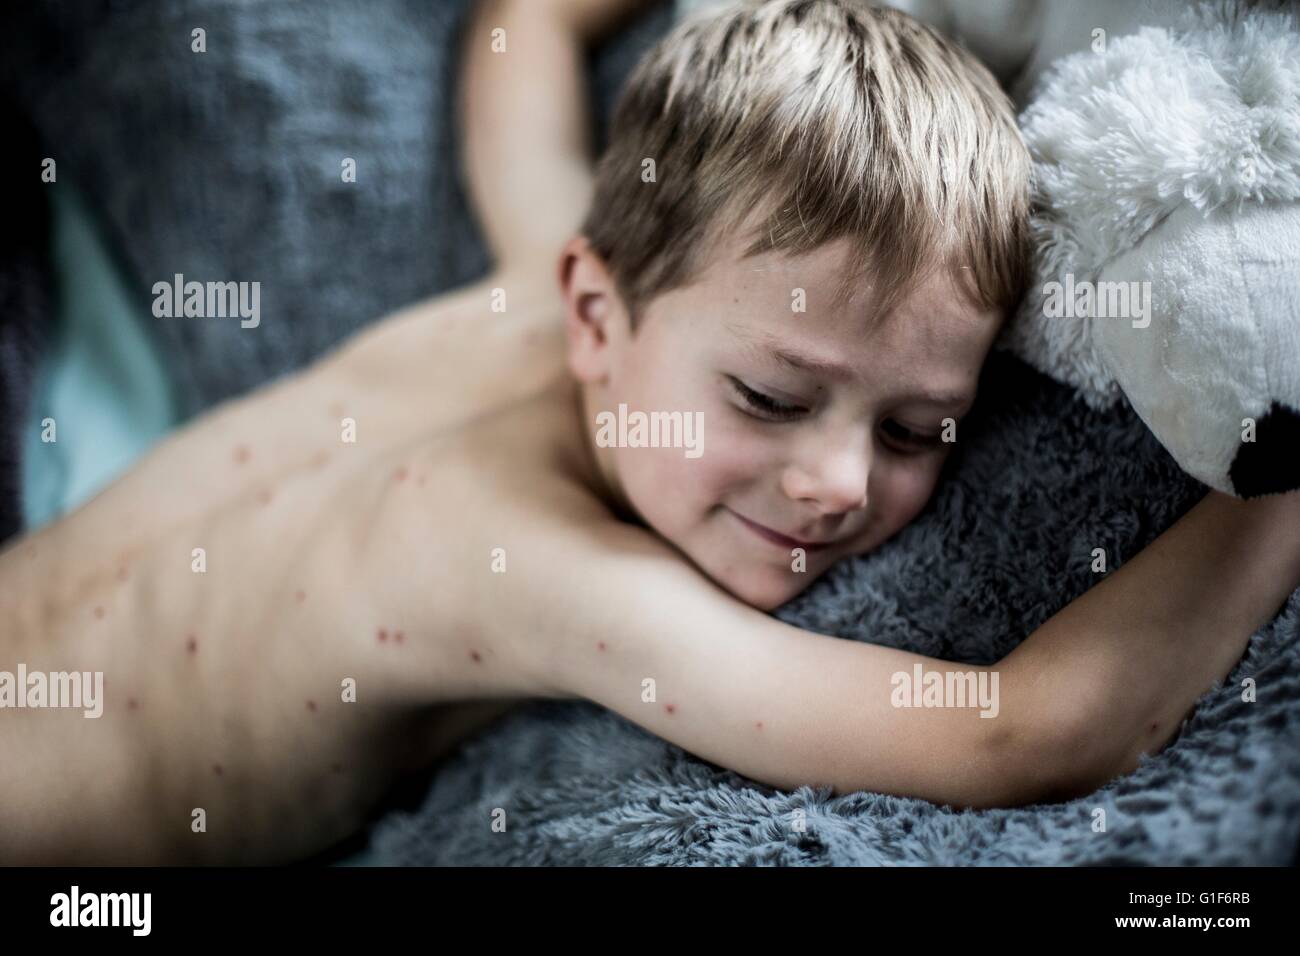 Model Released. Young Boy Lying Down With Chickenpox Stock Photo - Alamy